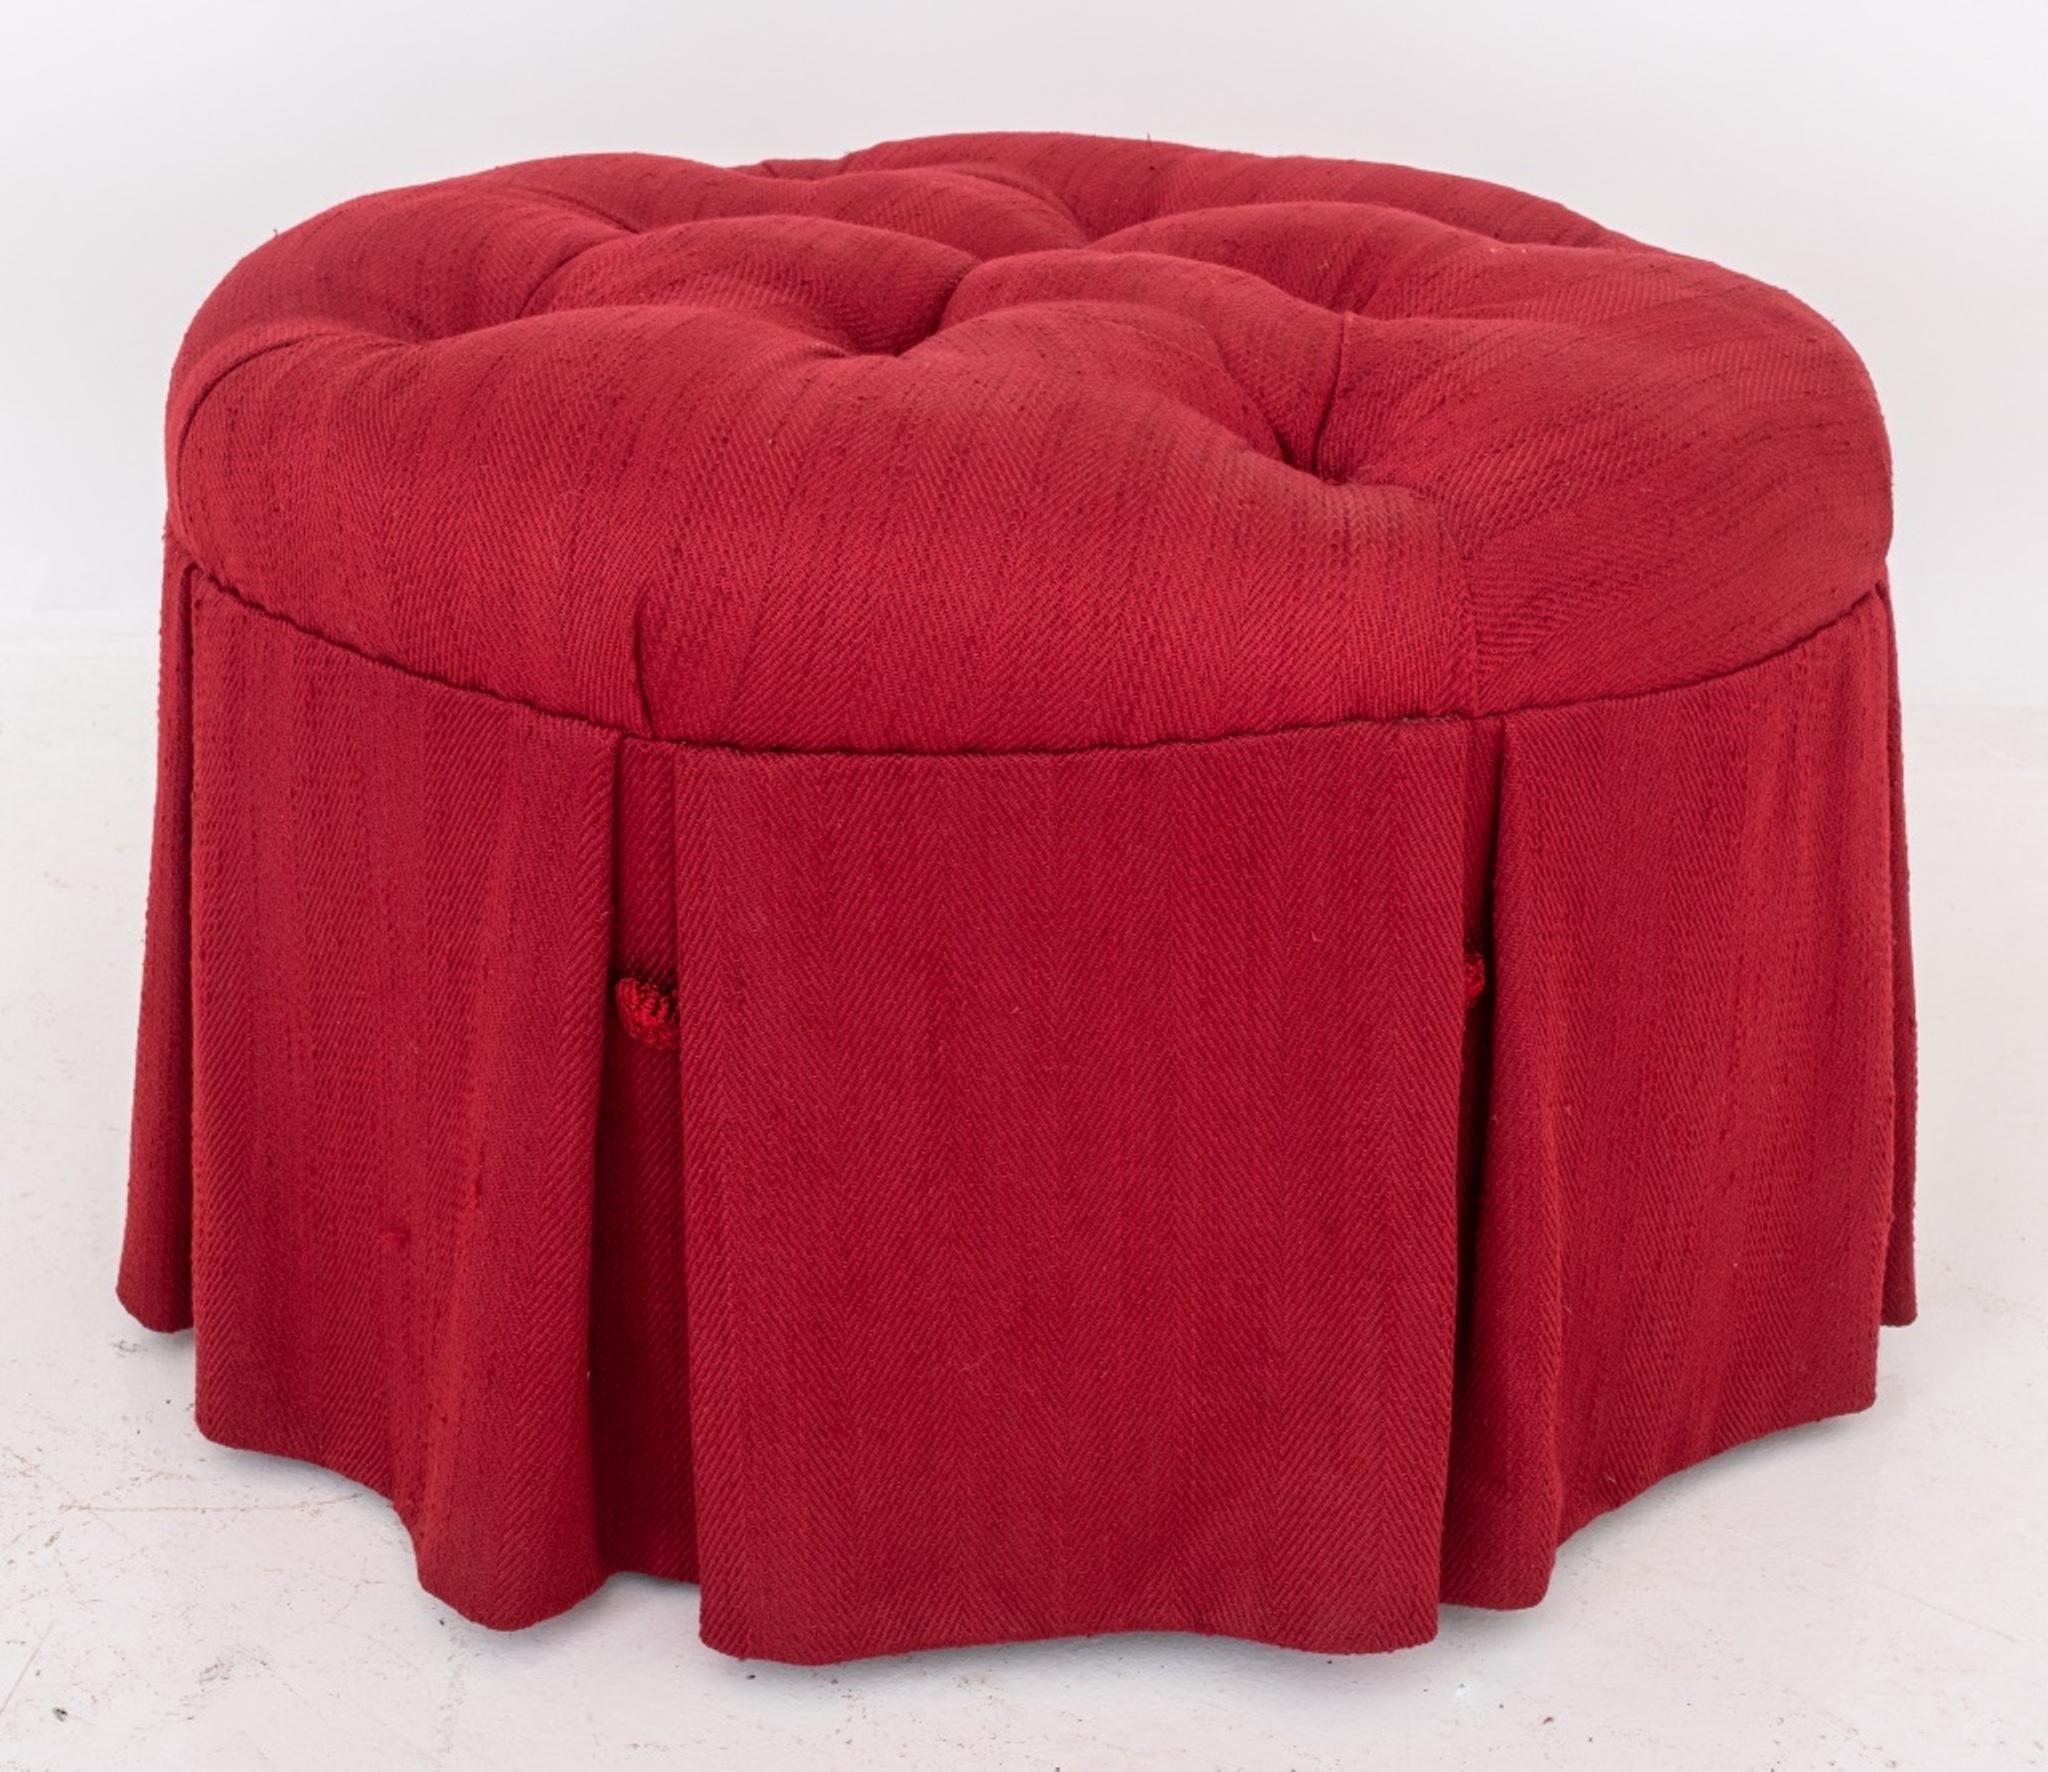 Upholstered 'pouf' or ottoman, circular with buttoned top and kick-pleated skirt, covered in a garnet red textile. In very good vintage condition. 

Dealer: S138XX 